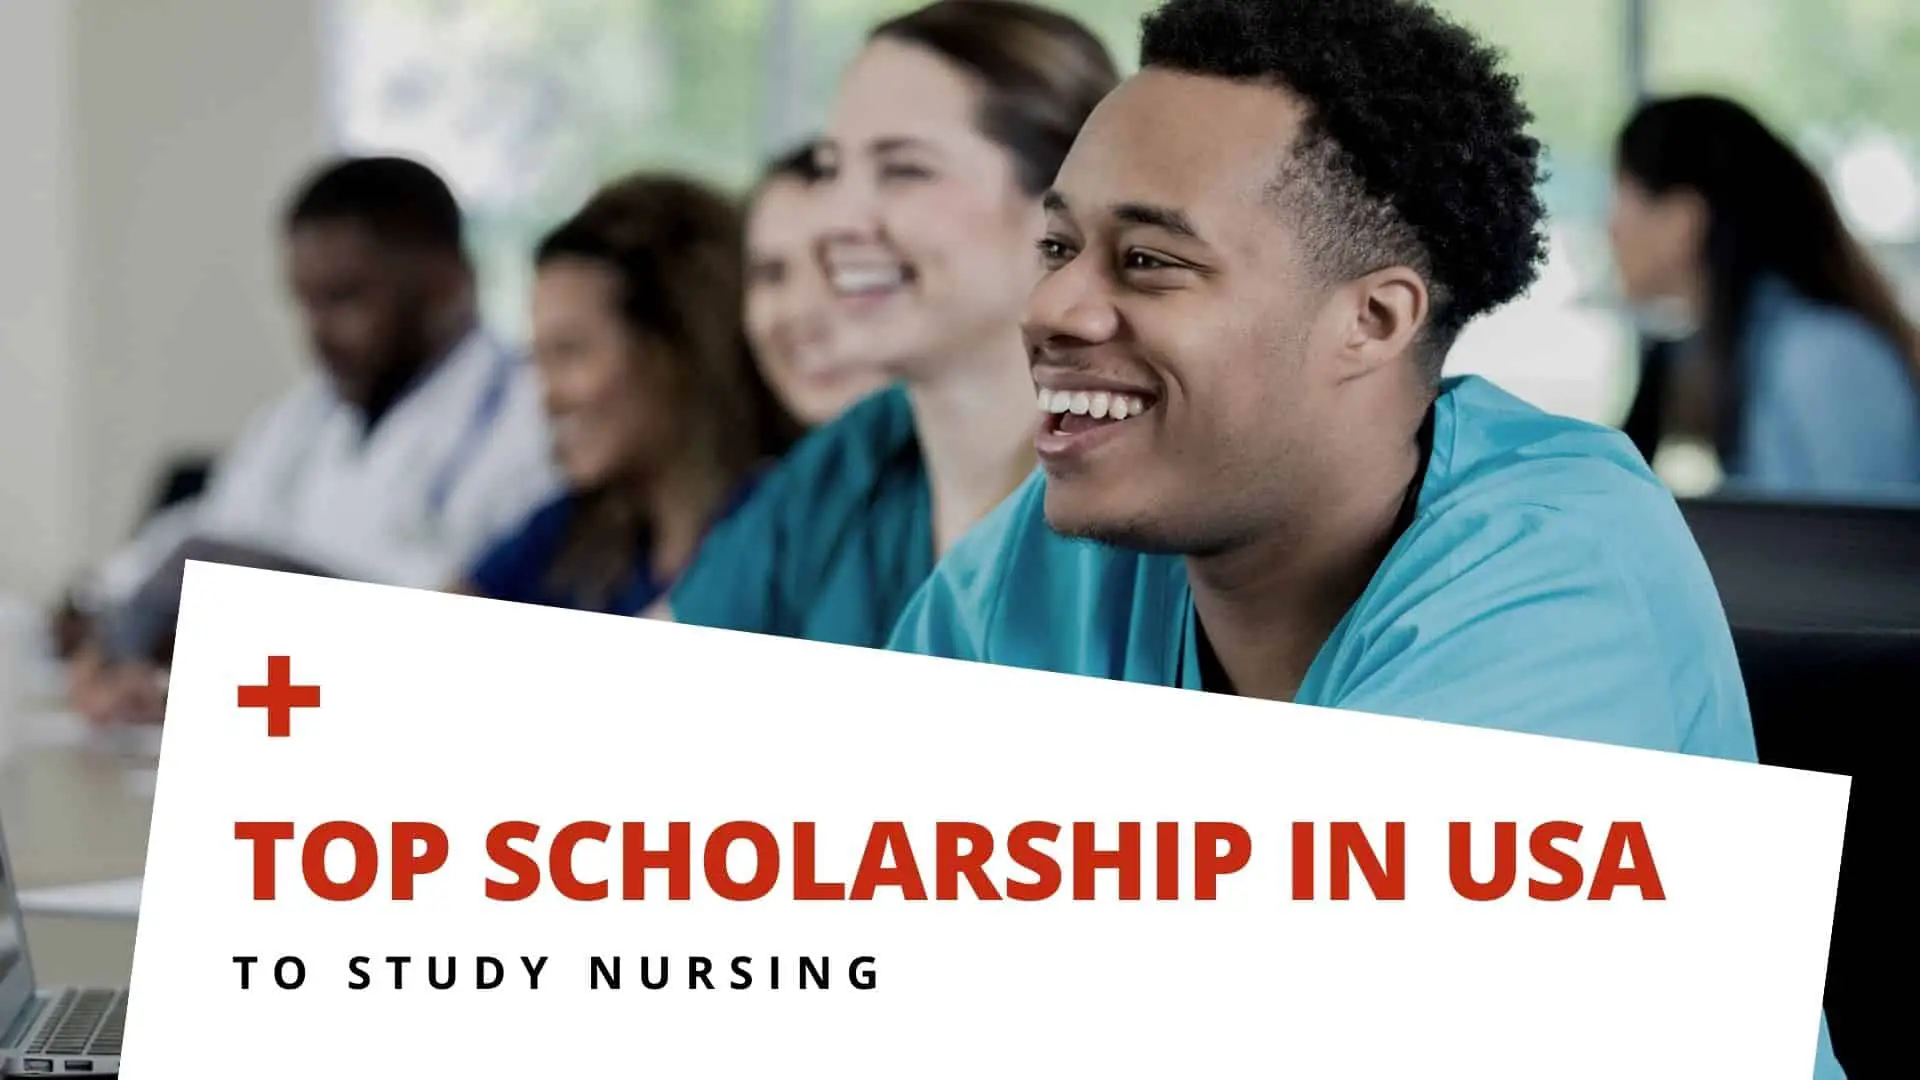 Top Scholarship To Study Nursing In USA In 2022